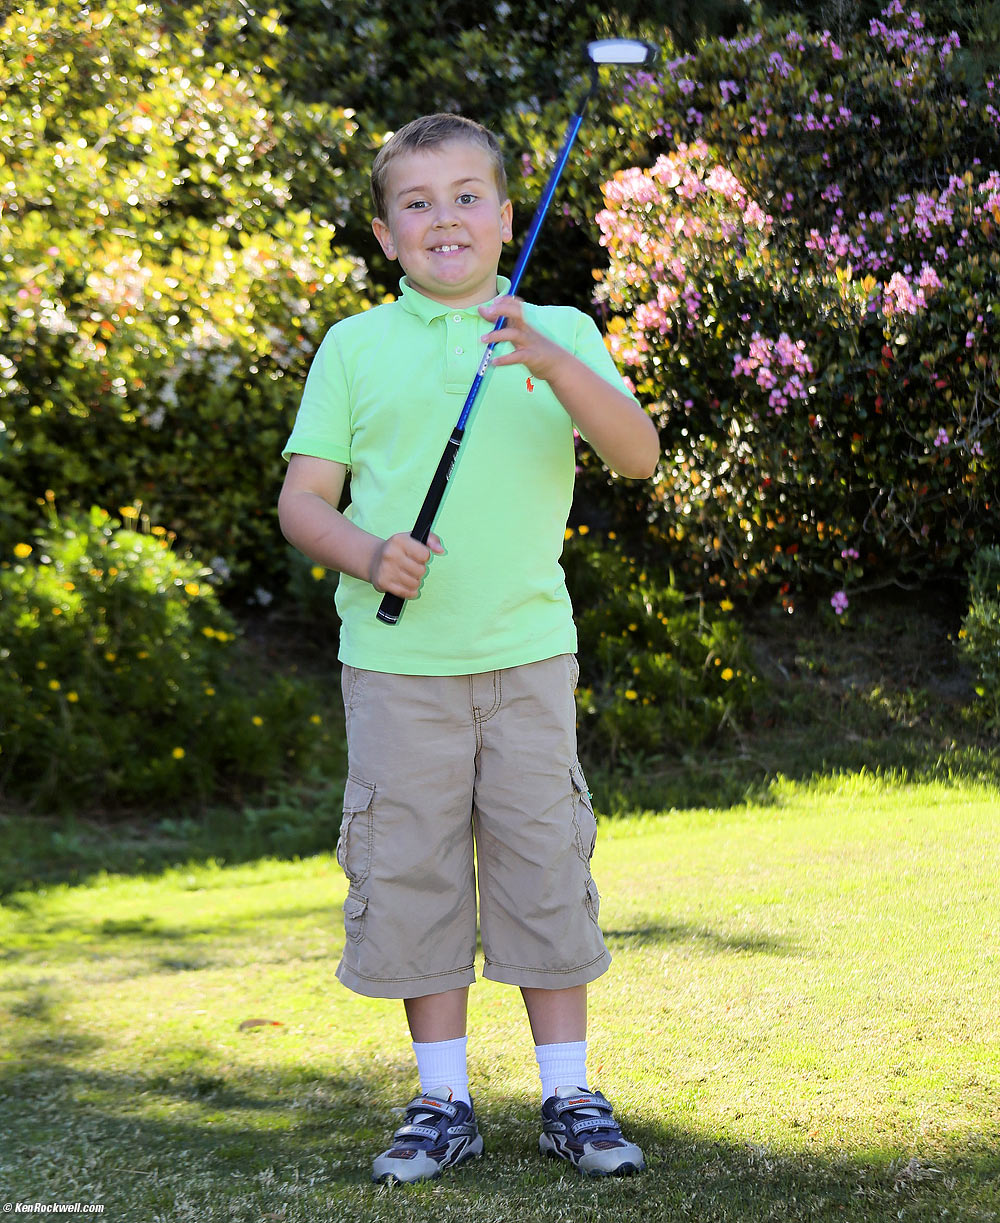 Ryan warms up for his very first golf lesson